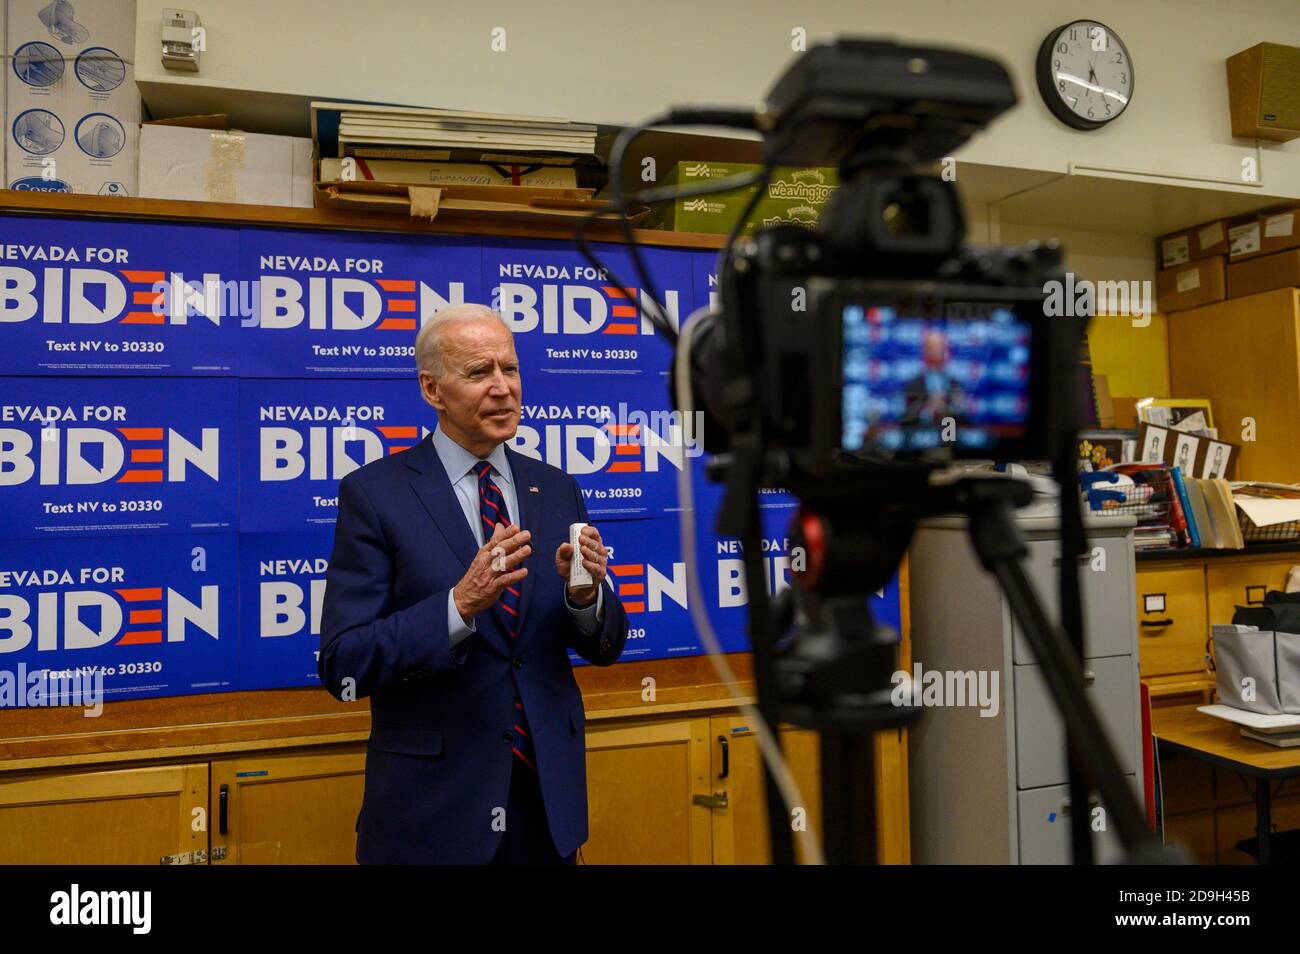 Sacramento, California, USA. 10th Jan, 2019. Presidential candidate Joe Biden gives and exclusive interview to The Sacramento Bee at Sparks High School in Sparks, Nevada on Friday, Jan. 11, 2020. Credit: Renée C. Byer/ZUMA Wire/Alamy Live News Stock Photo